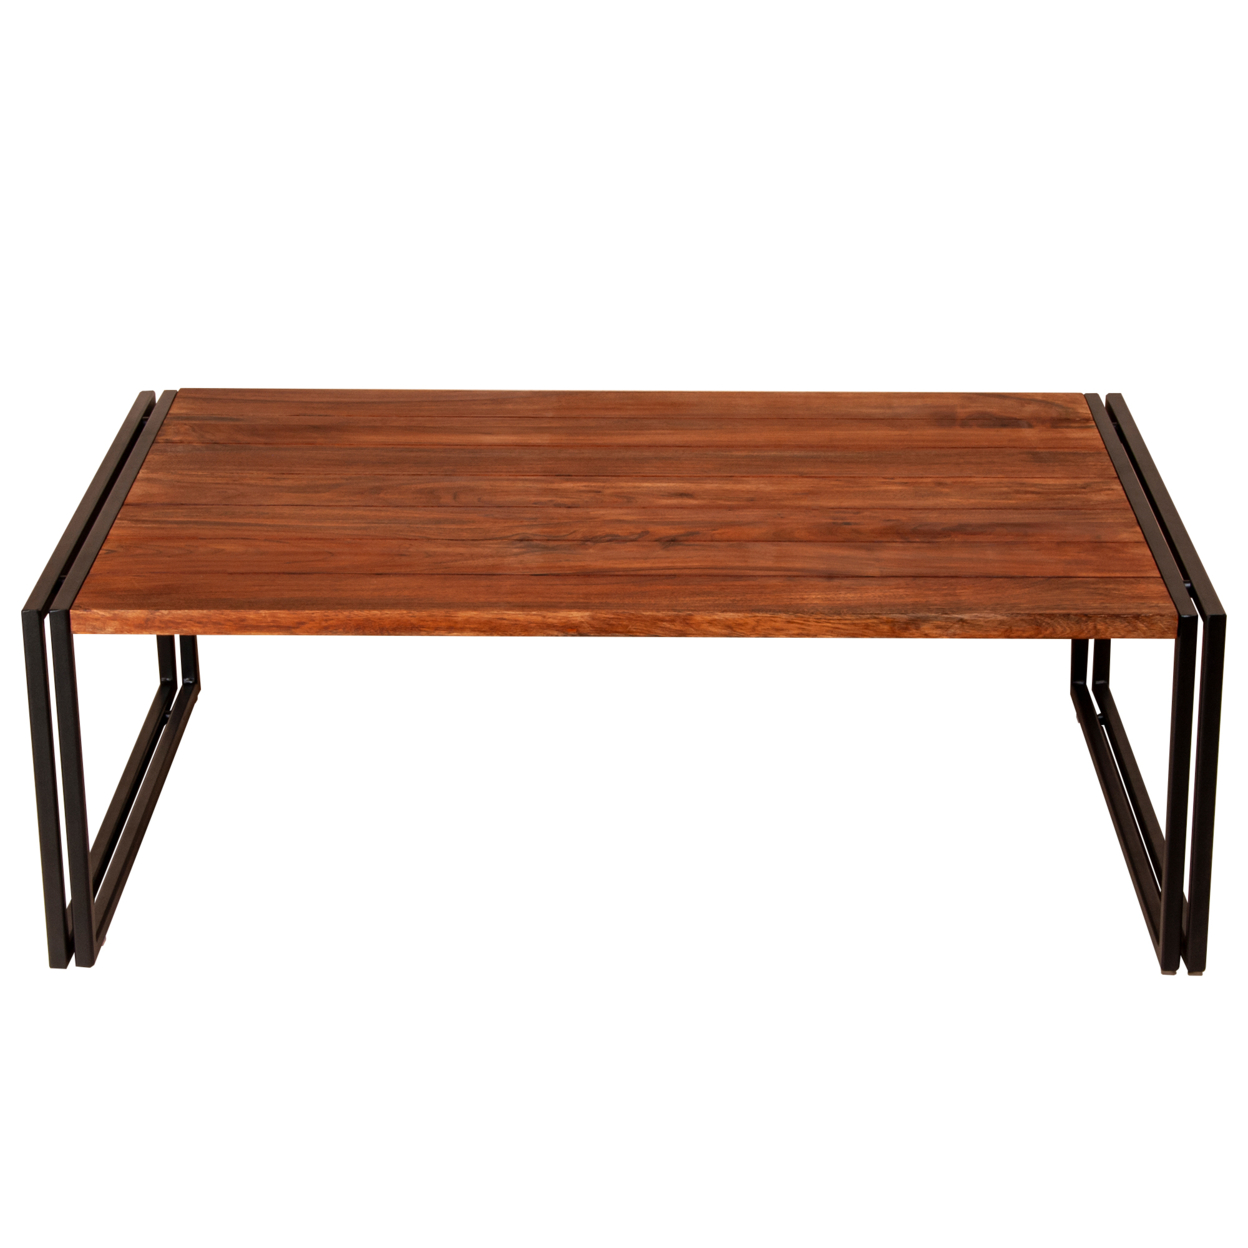 48 Inch Wooden Coffee Table With Double Metal Sled Base, Brown And Black- Saltoro Sherpi